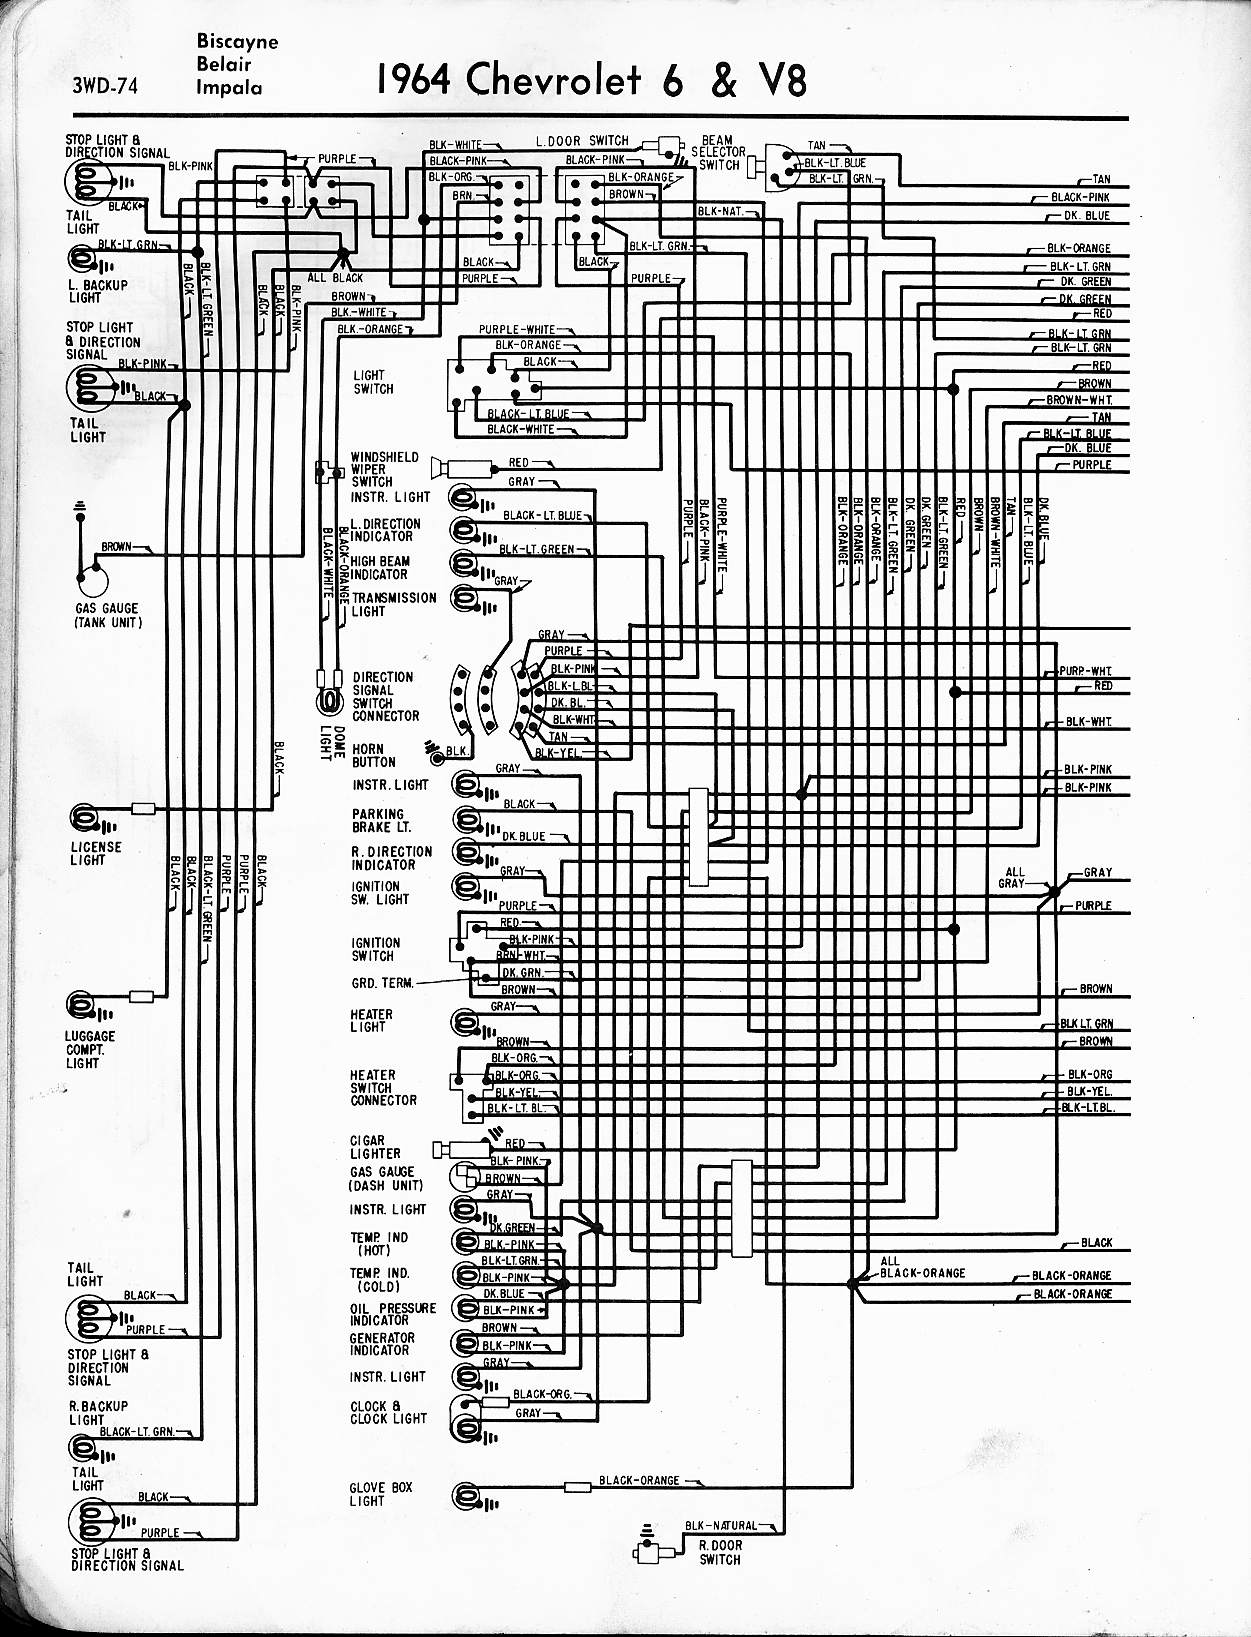 57 - 65 Chevy Wiring Diagrams 1964 Corvette Wiring Diagram The Old Car Manual Project